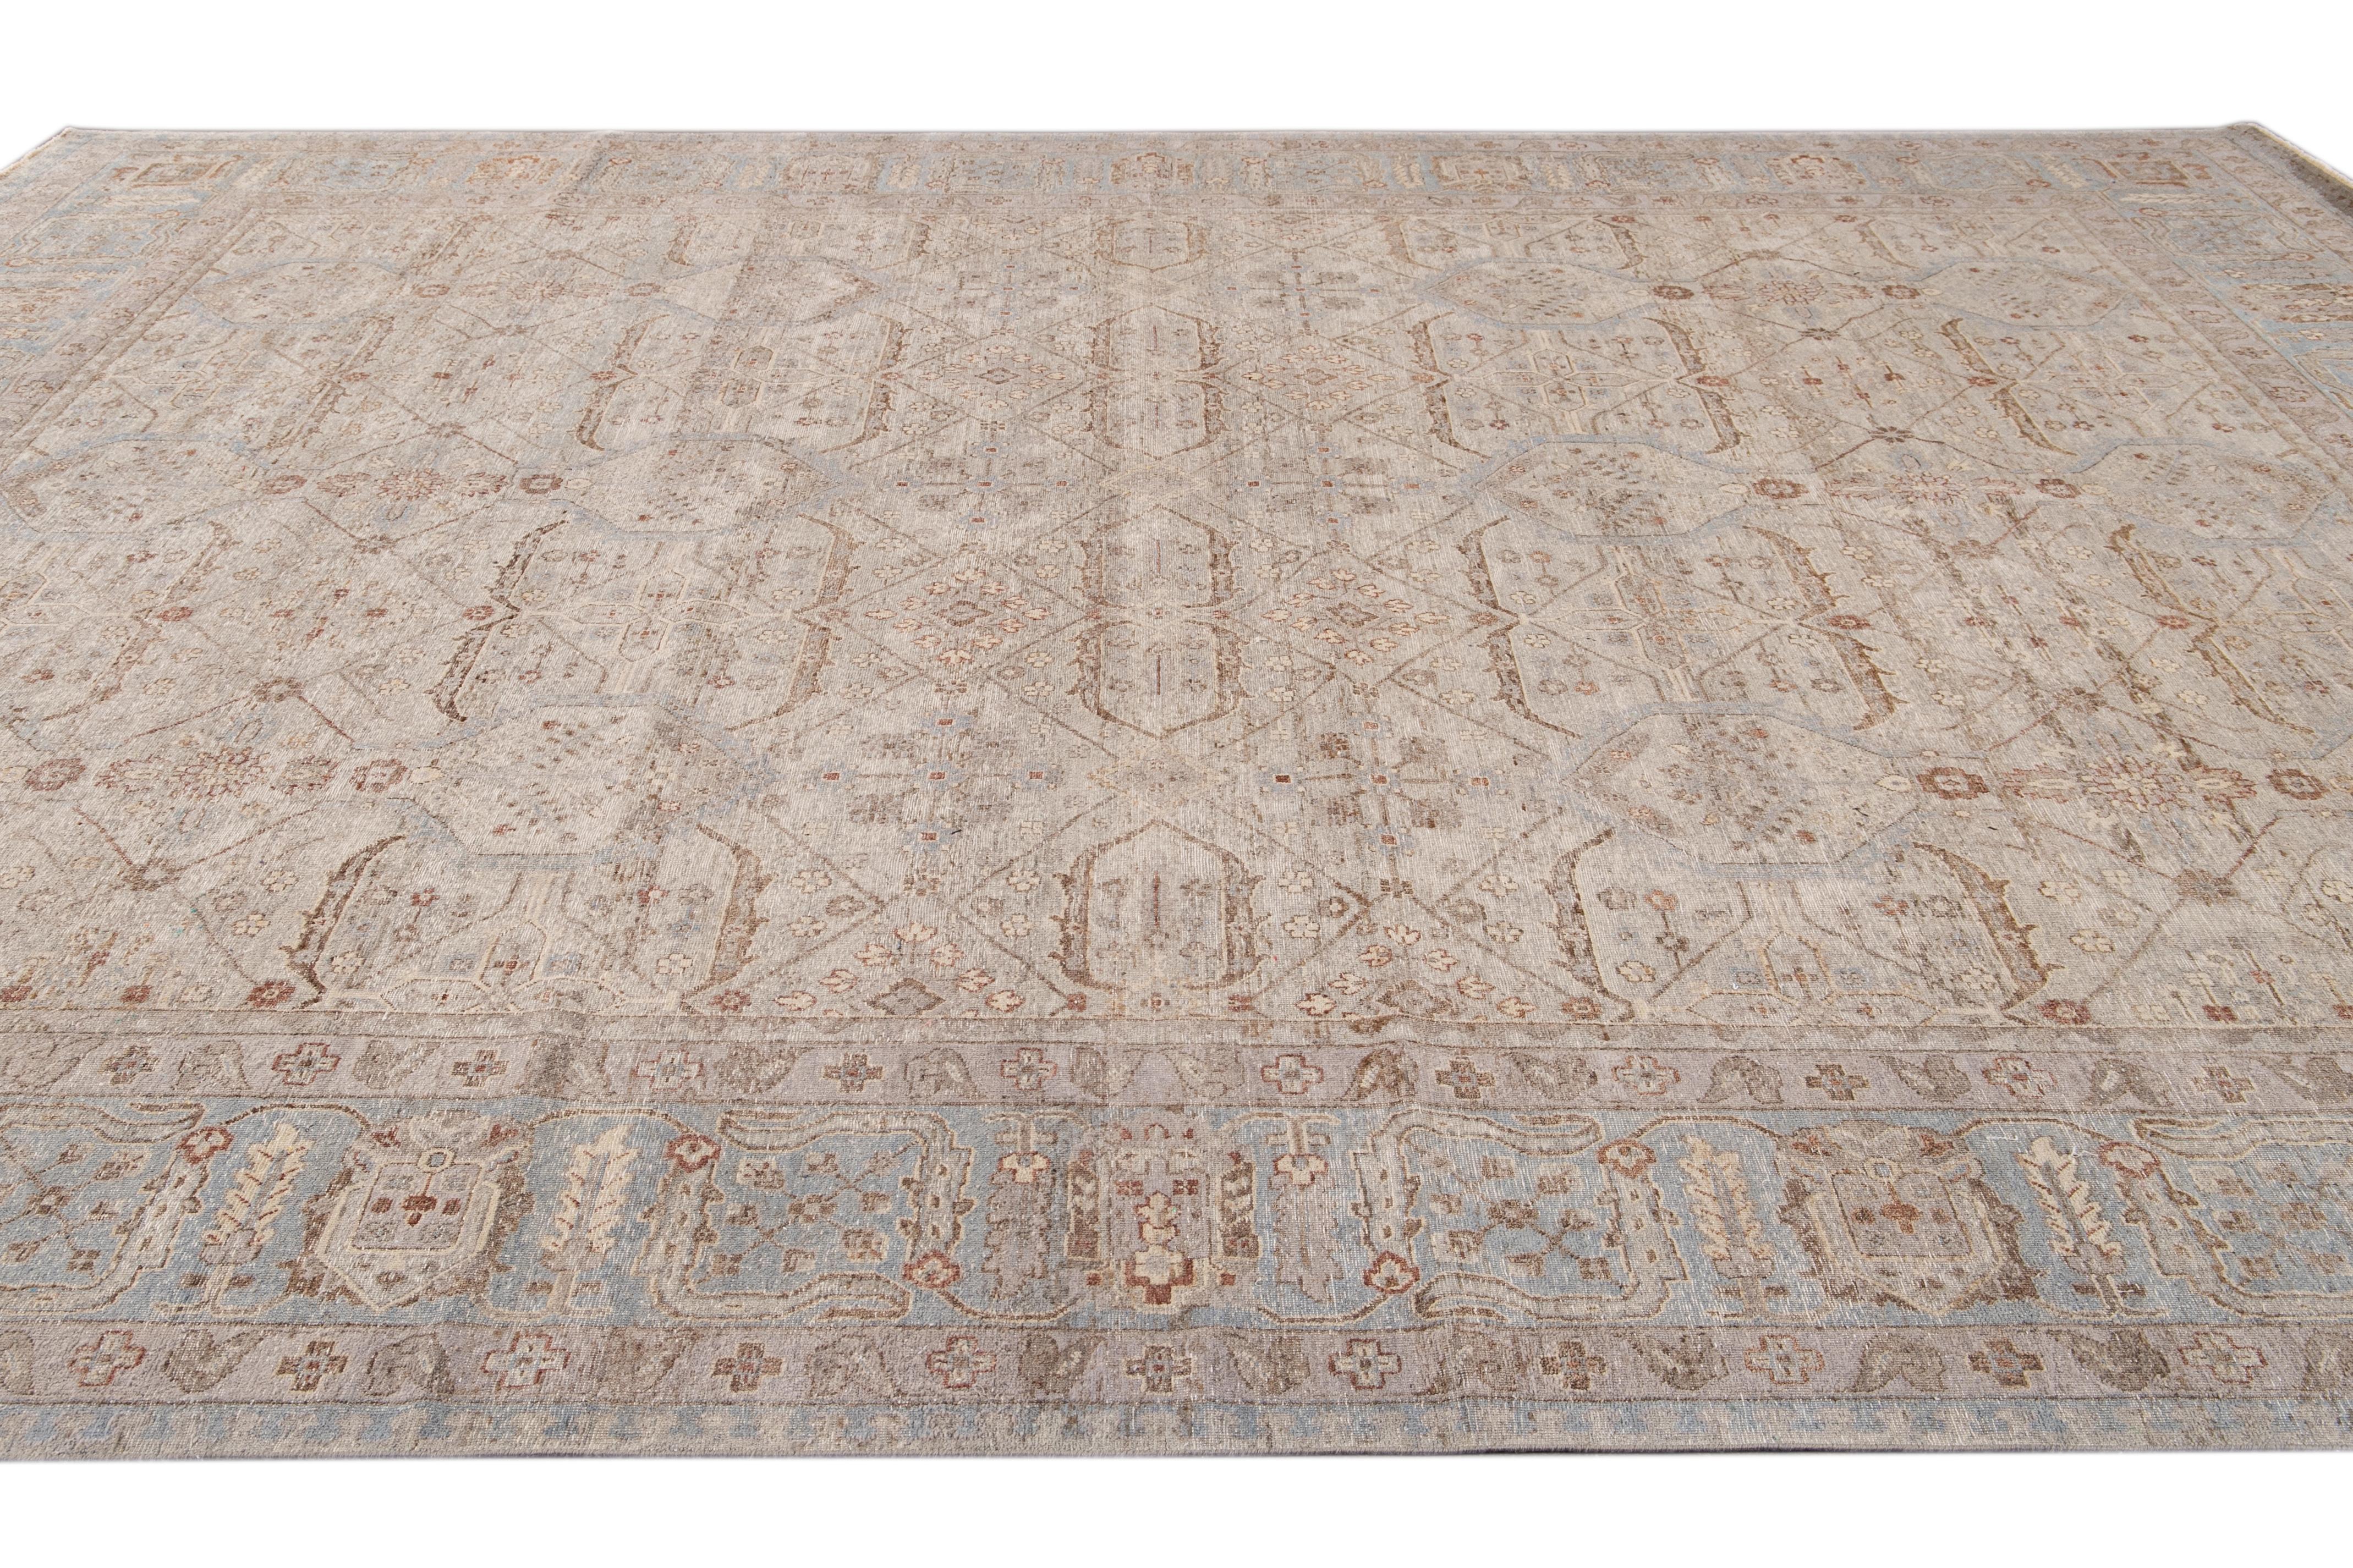 Hand-Knotted 21st Century Contemporary Tabriz Style Wool Rug